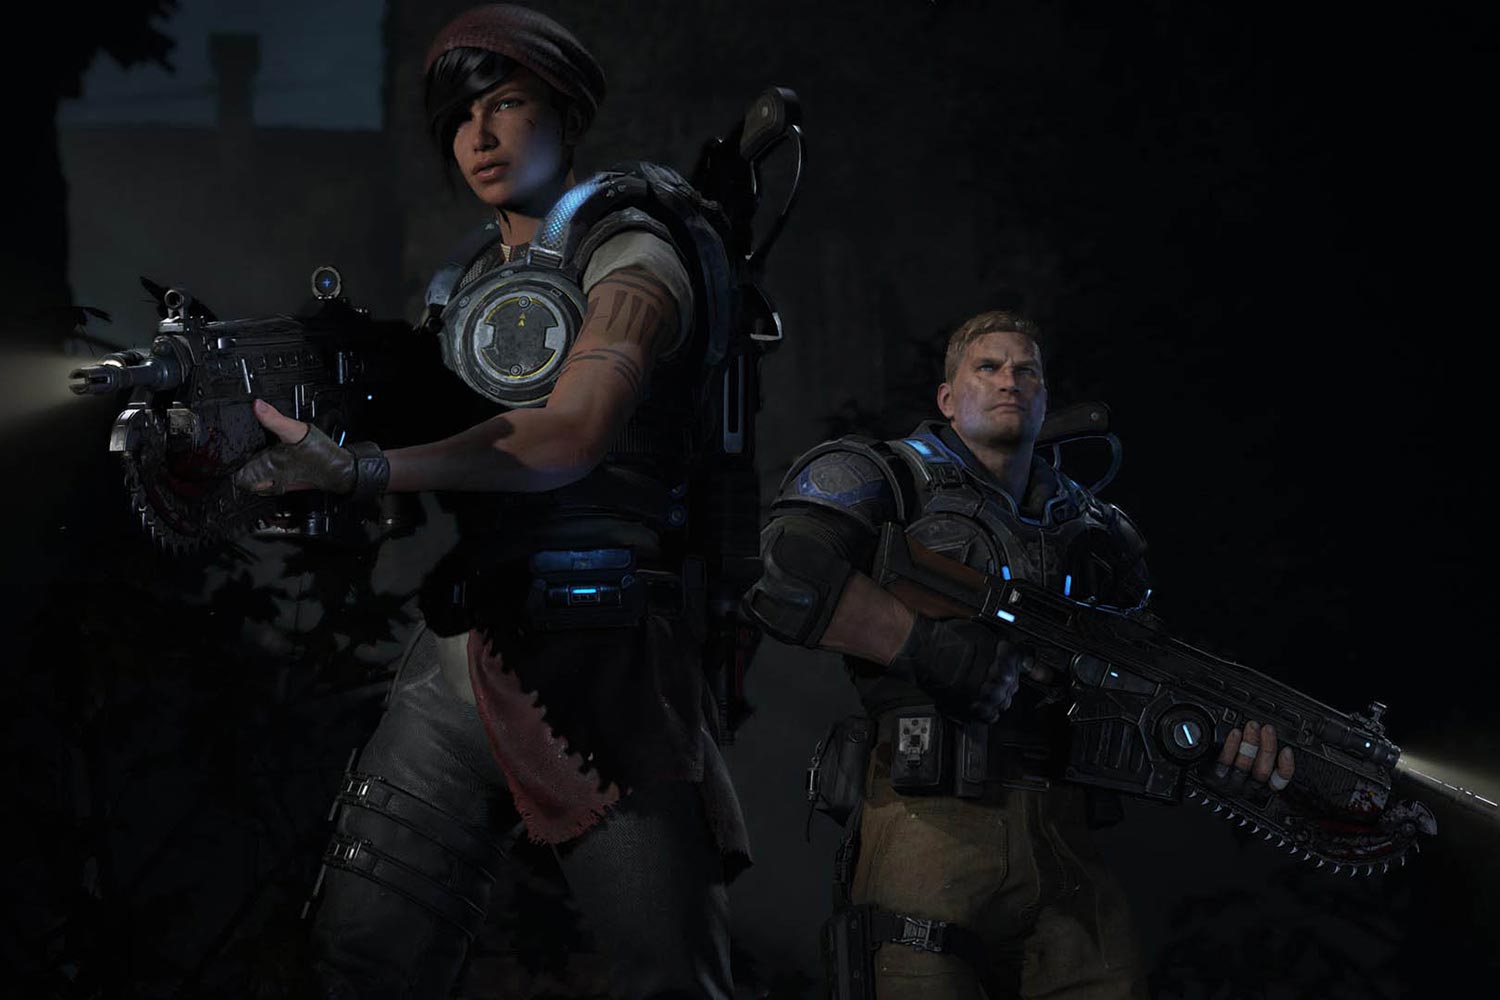 Basic information and tips - Gears of War 4 Game Guide